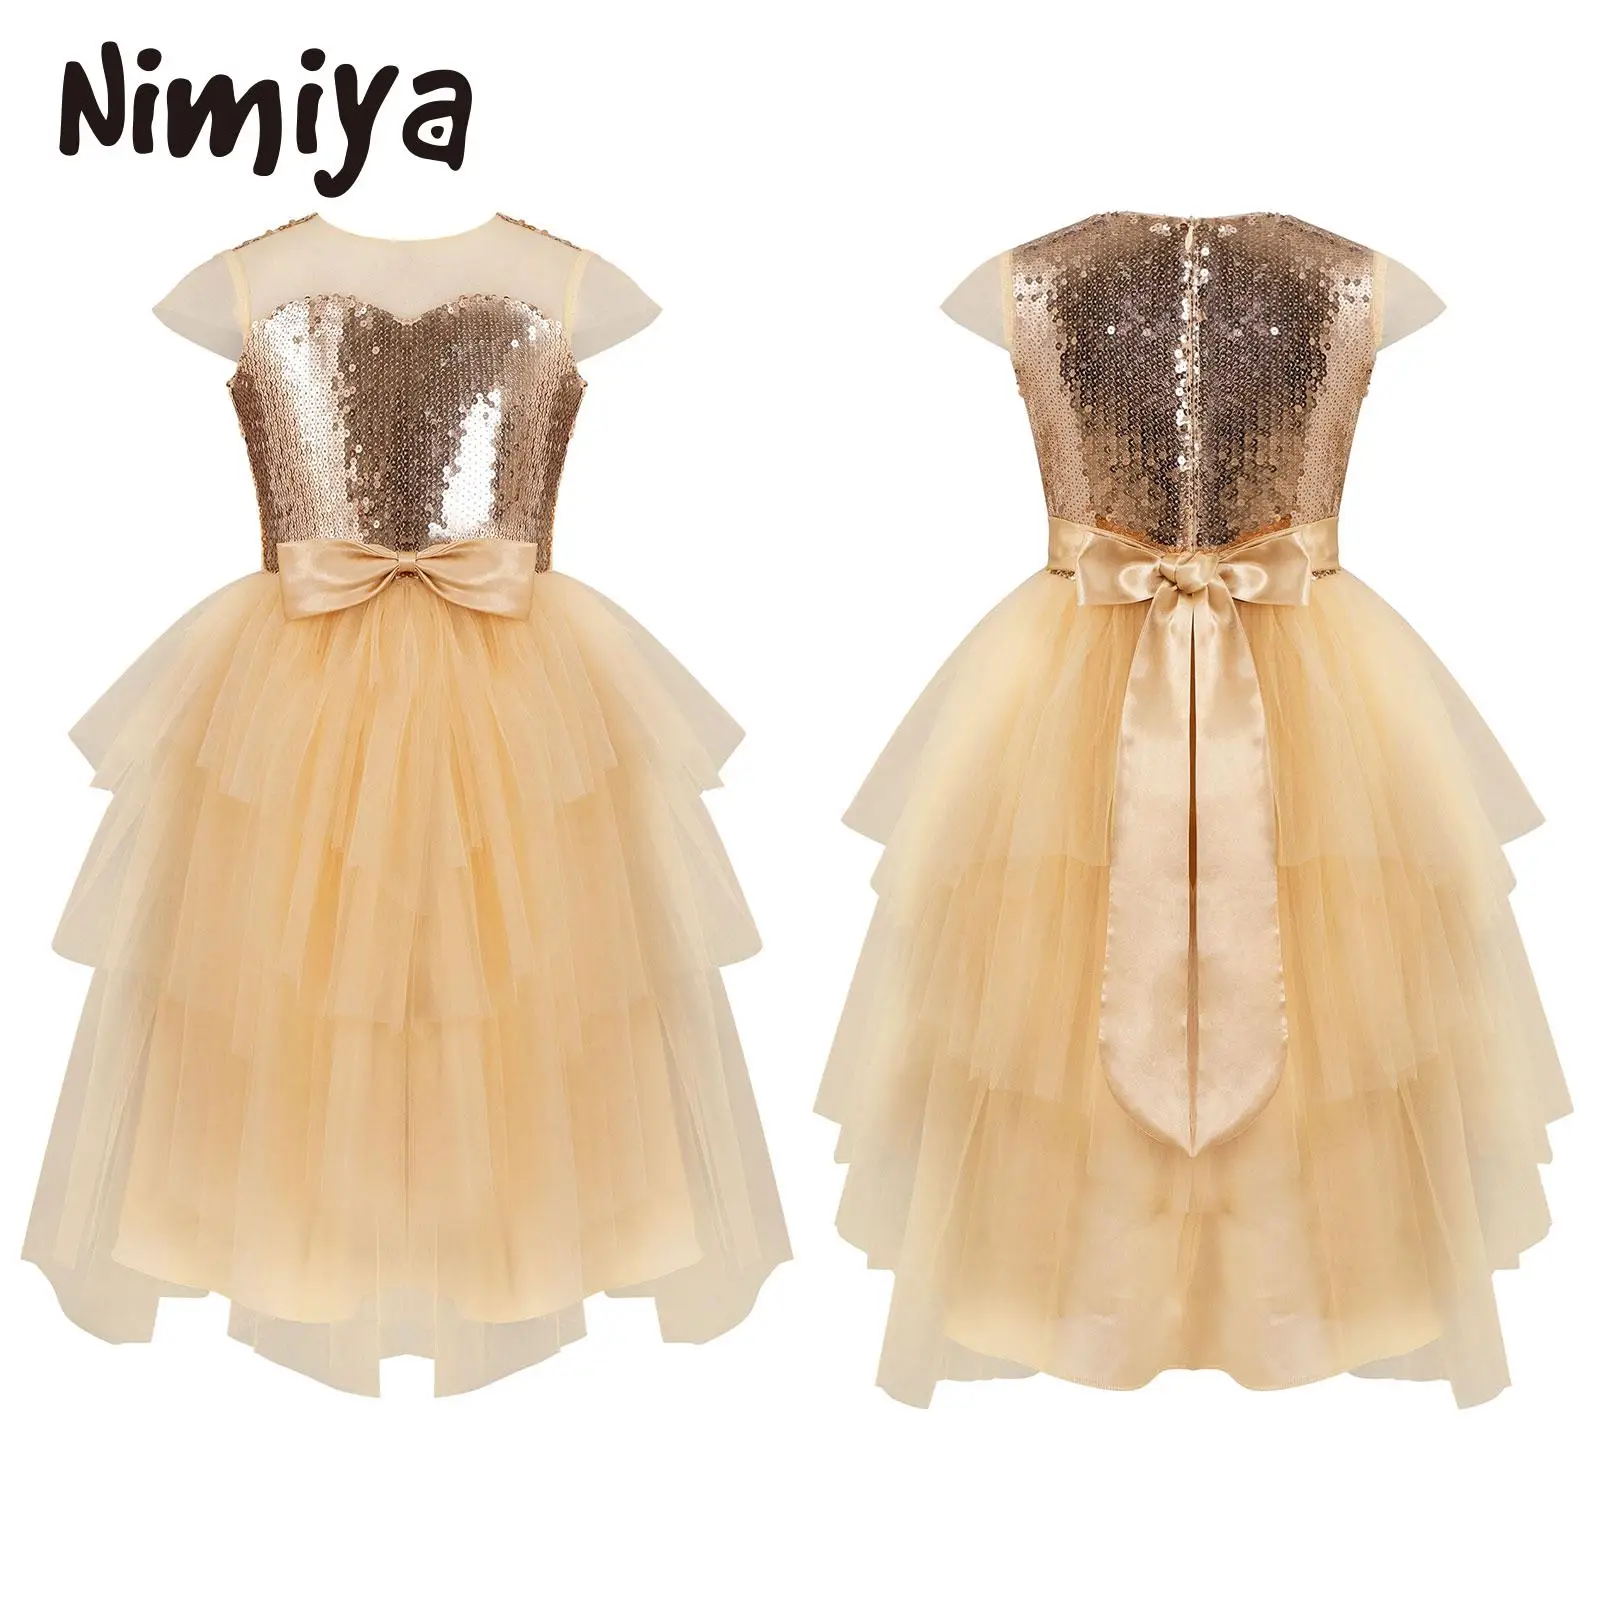 

Nimiya Kids Girls Shiny Sequin Multiple Tiered Tulle Champagne Party Dress Cap Sleeve Satin Bow and Sash Fluffy Daily Dancewear